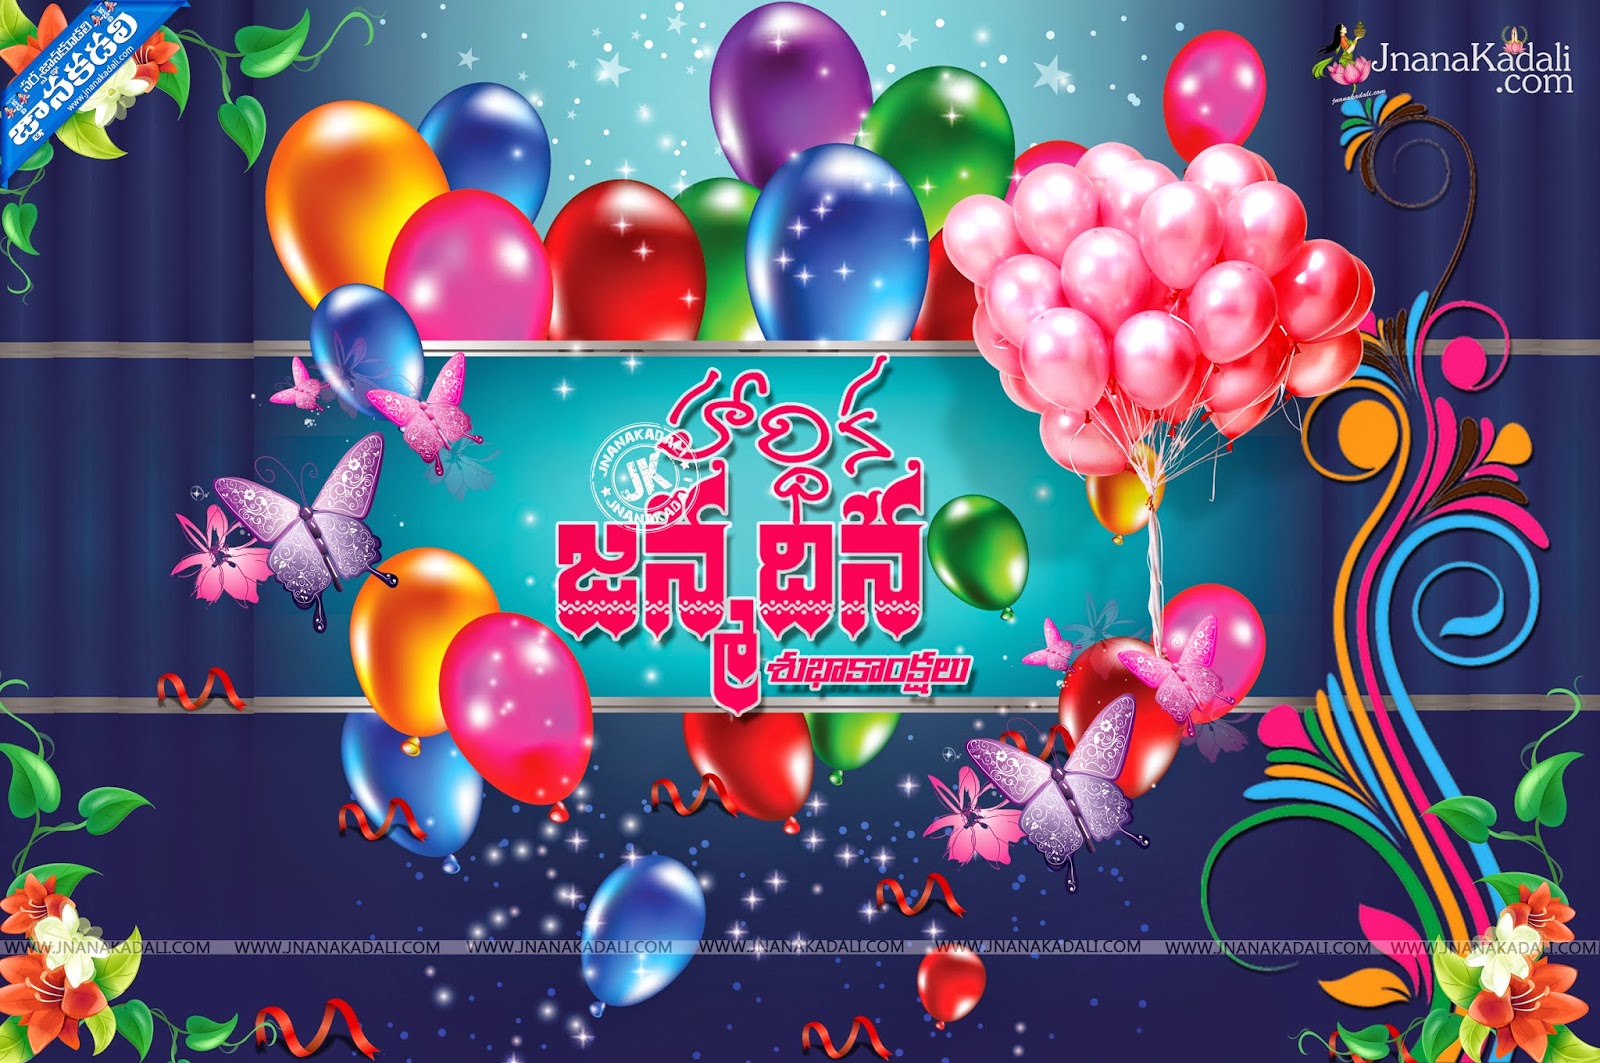 Telugu Best Birthday Quotes and Wishes Greetings Cards | JNANA ...